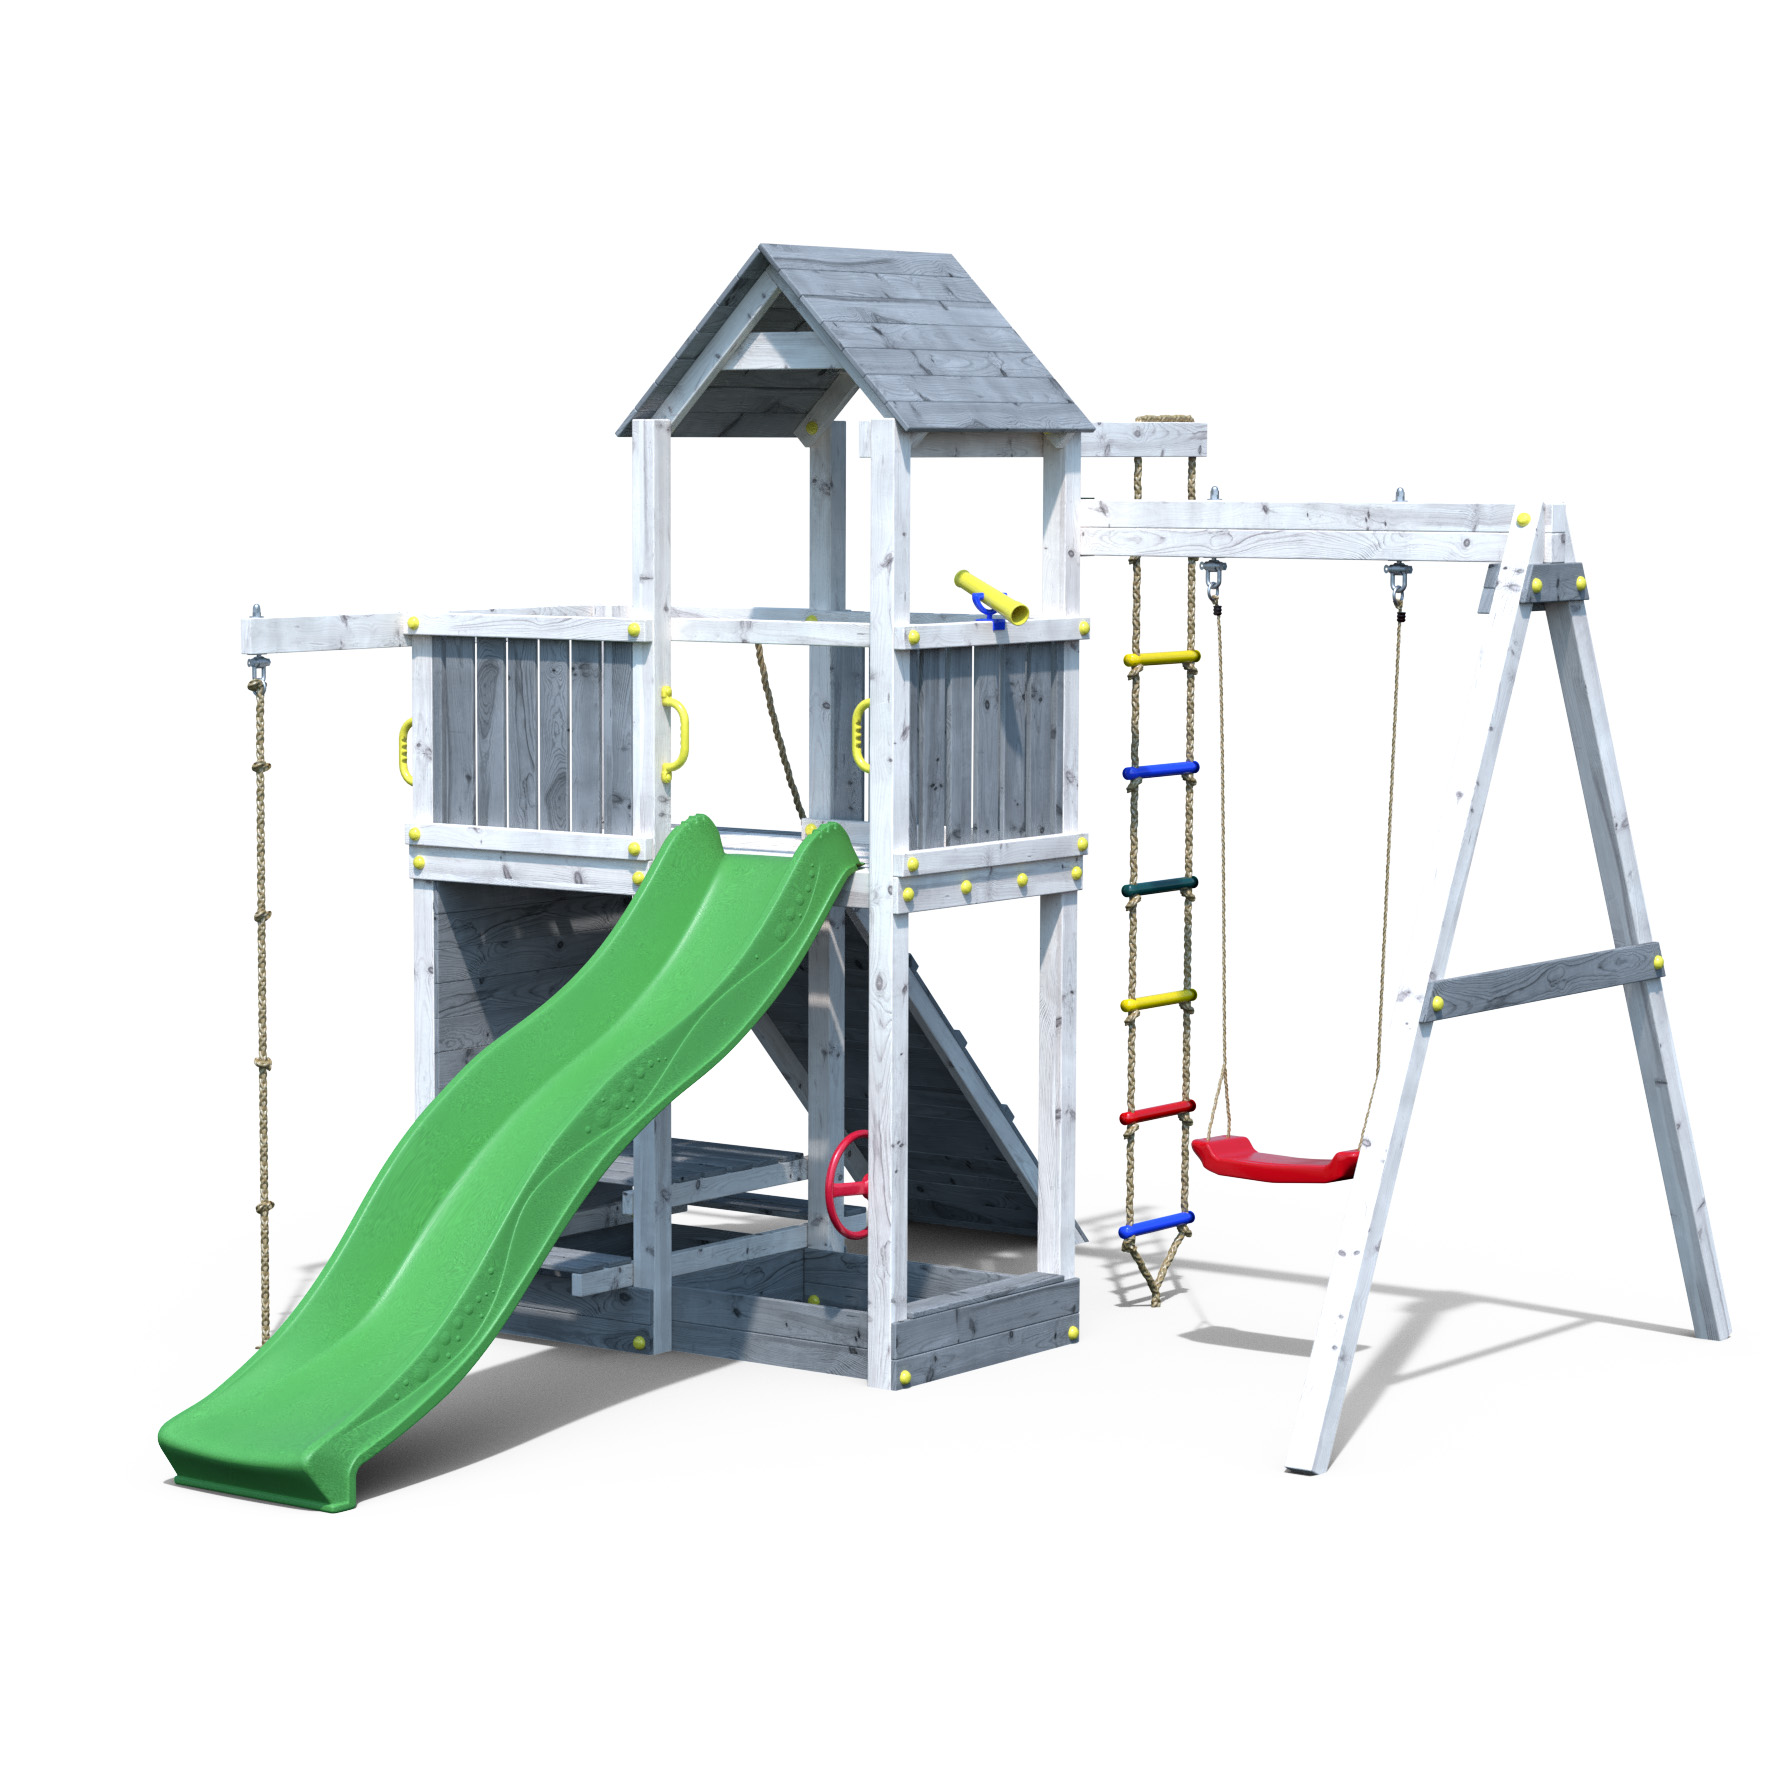 Featured image for “Shire Activer Playground”